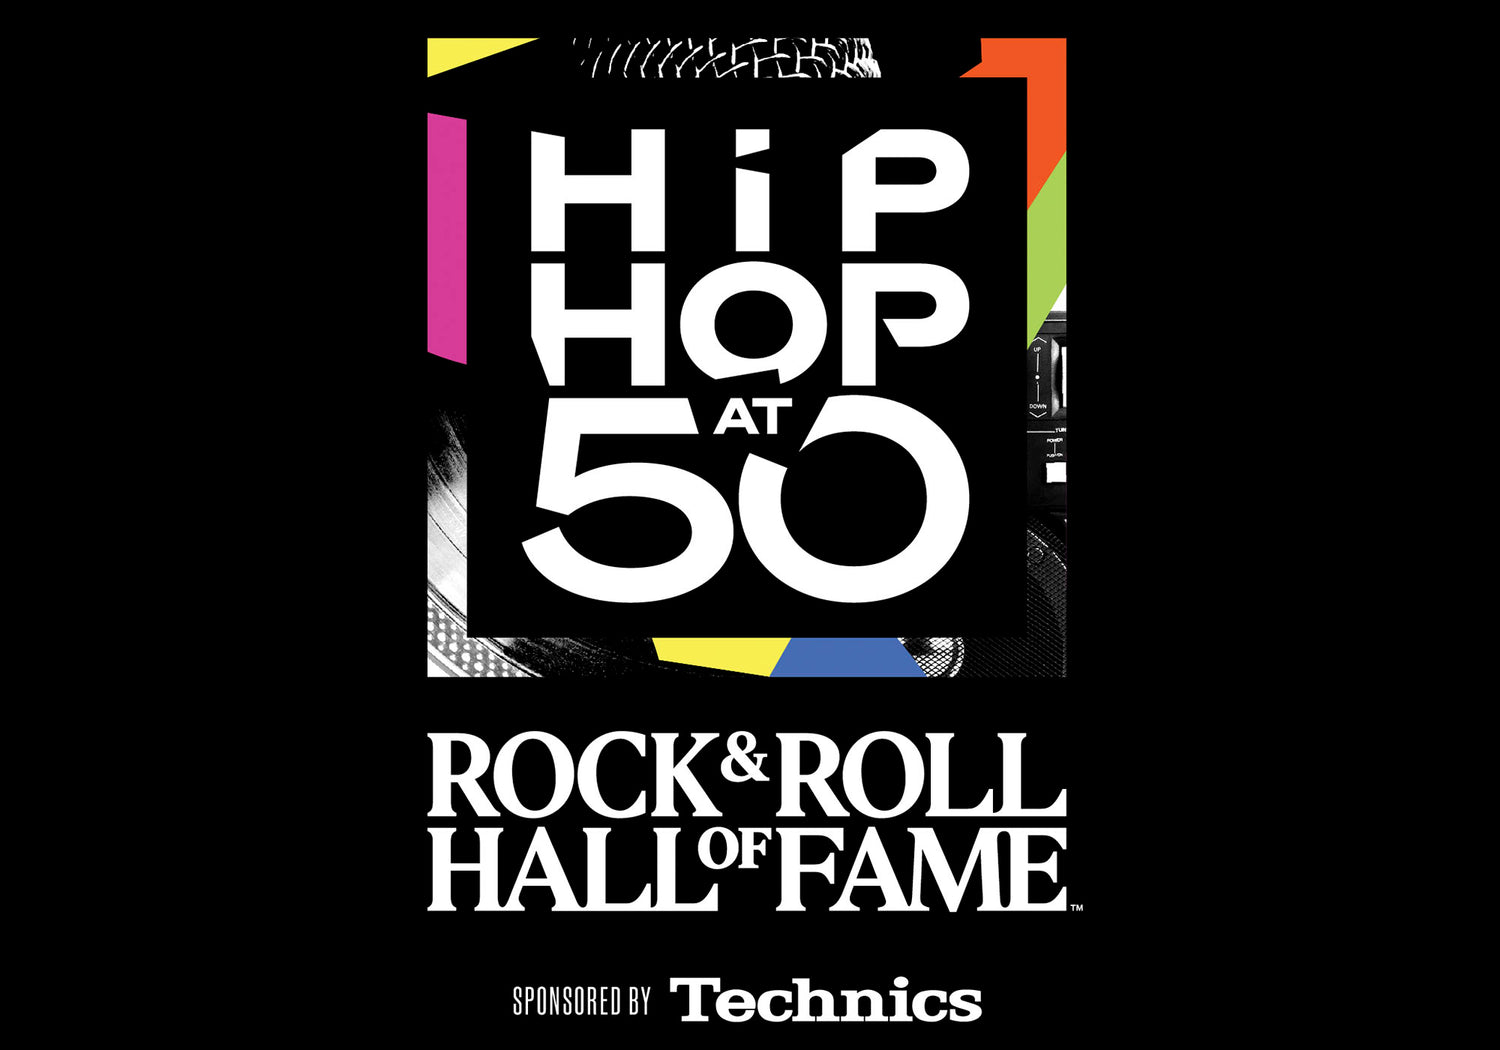 Technics Sponsors the Rock and Roll Hall of Fame's 50 Years of Hip Hop Exhibit